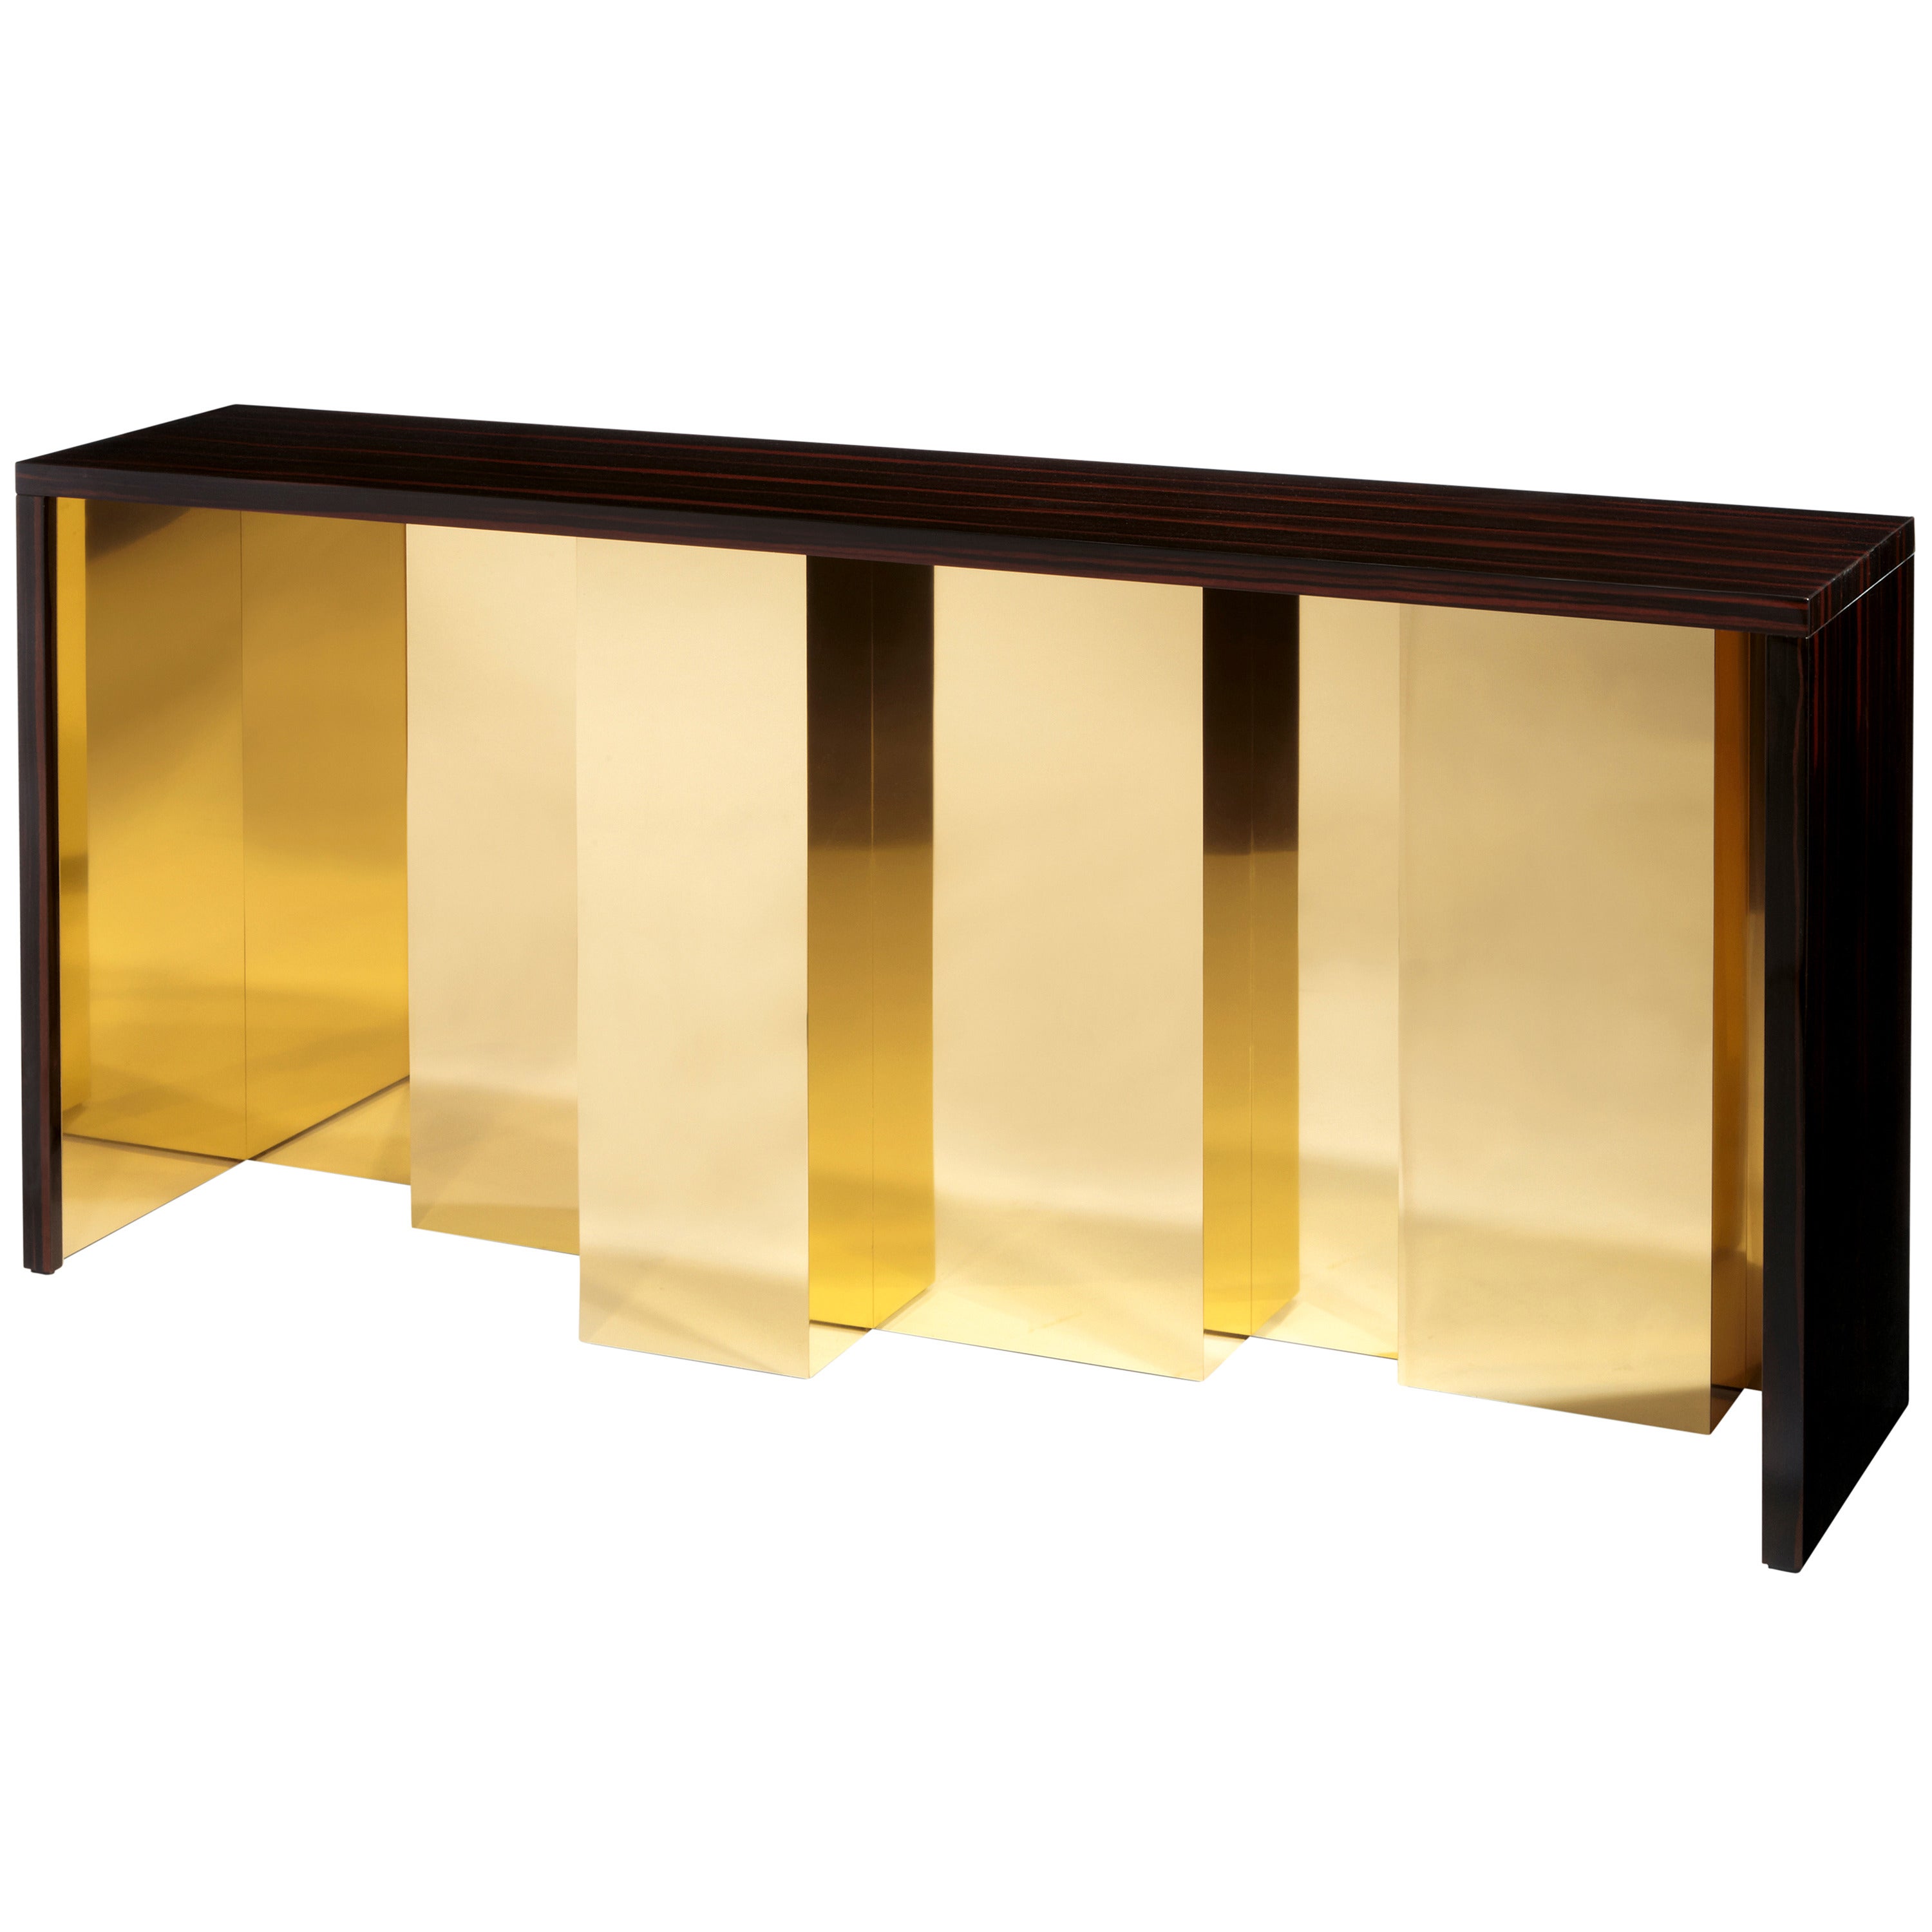 "Vibration" Console Table by Hervé Langlais for Galerie Negropontes